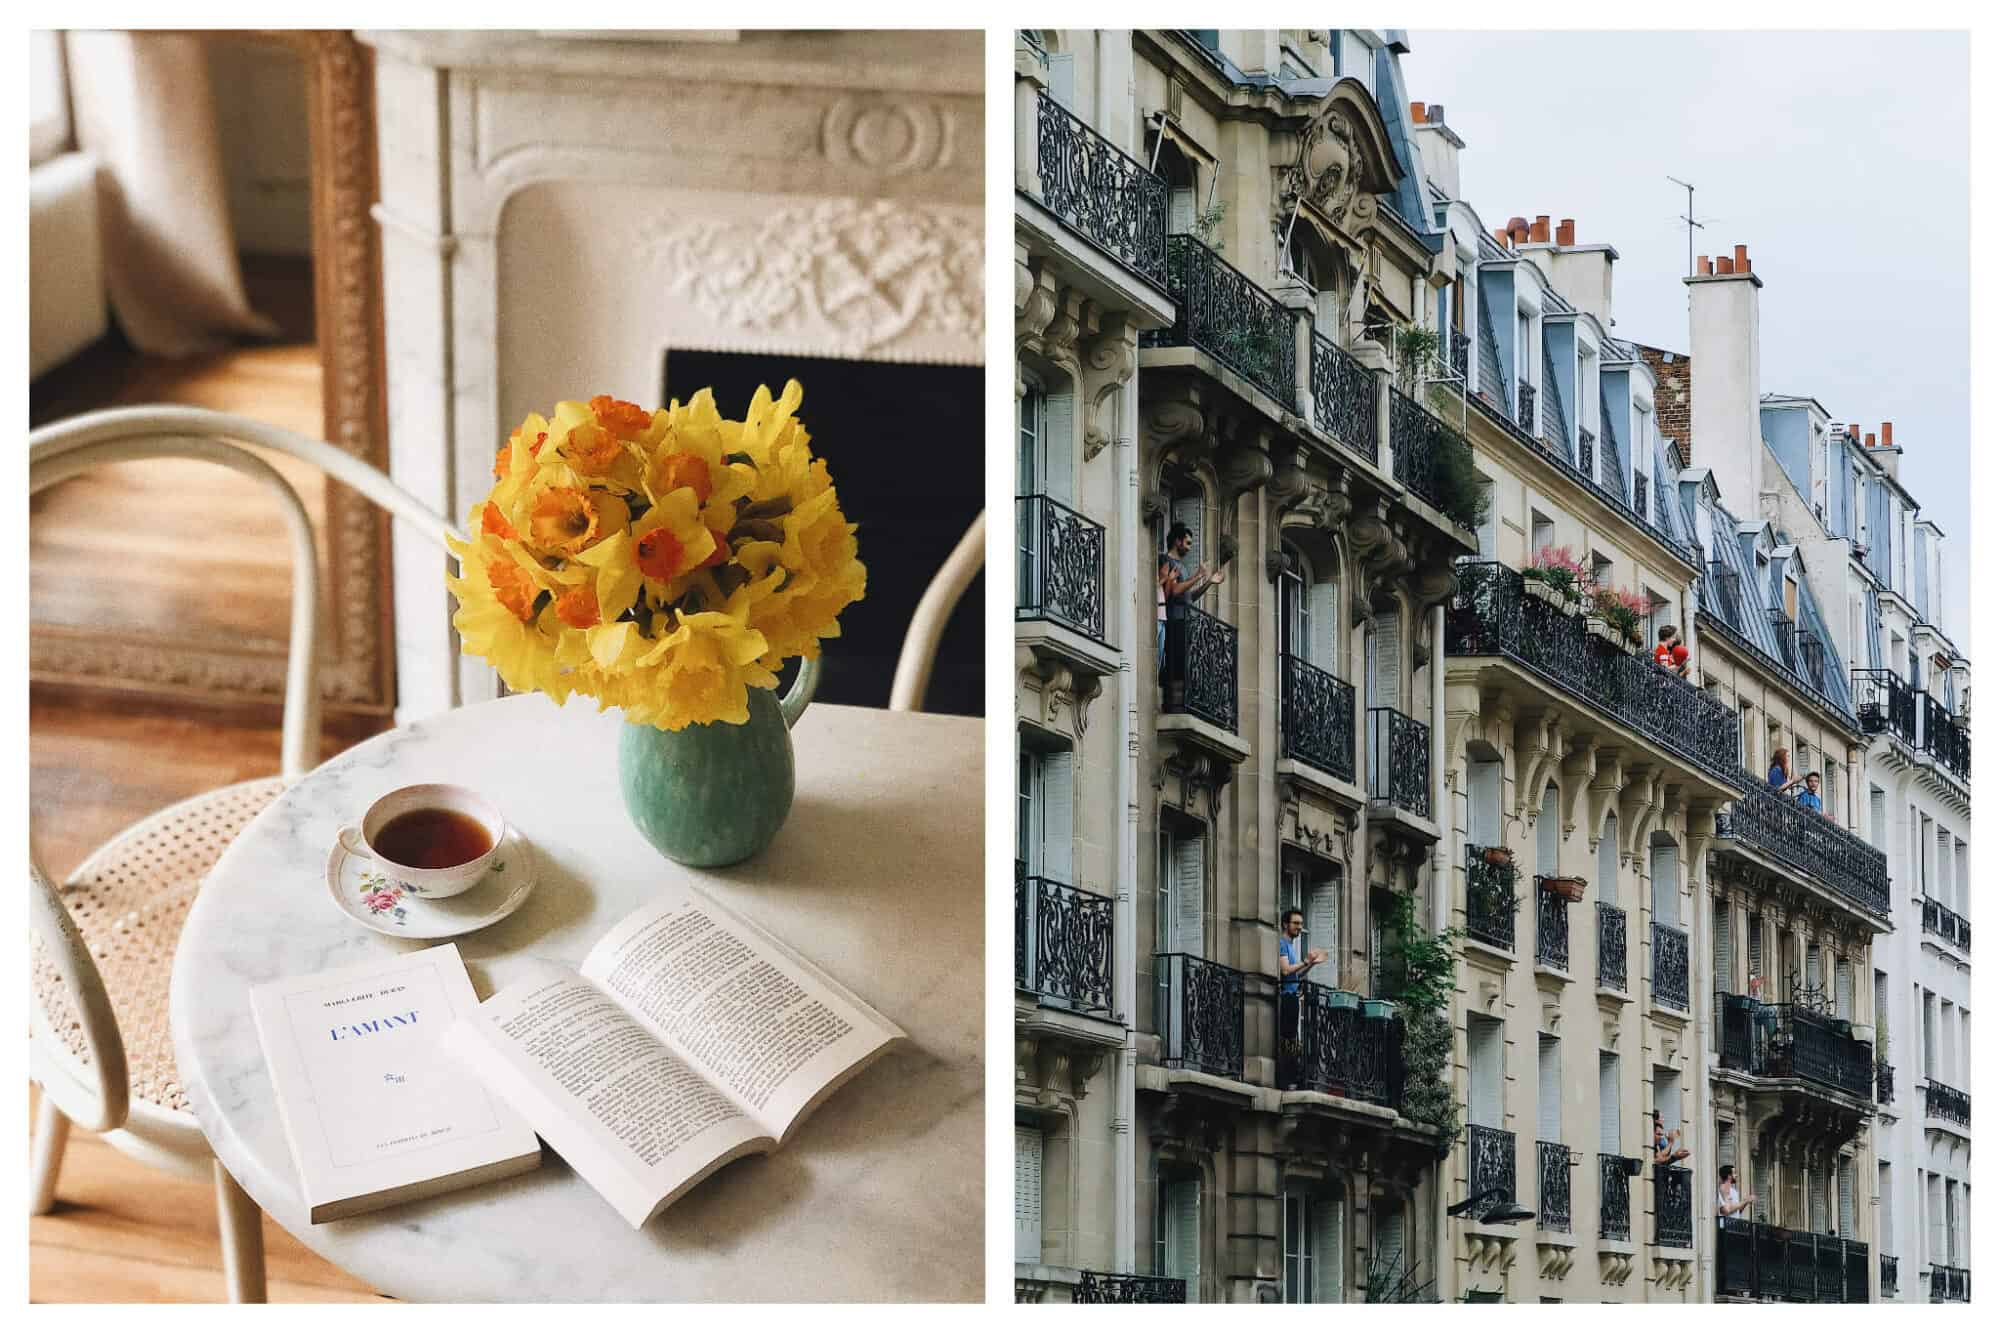 Left: Books, tea, and beautiful yellow flowers inside a blue vase sit atop a white marble table, Right: A view of Parisian apartments on a gray day.